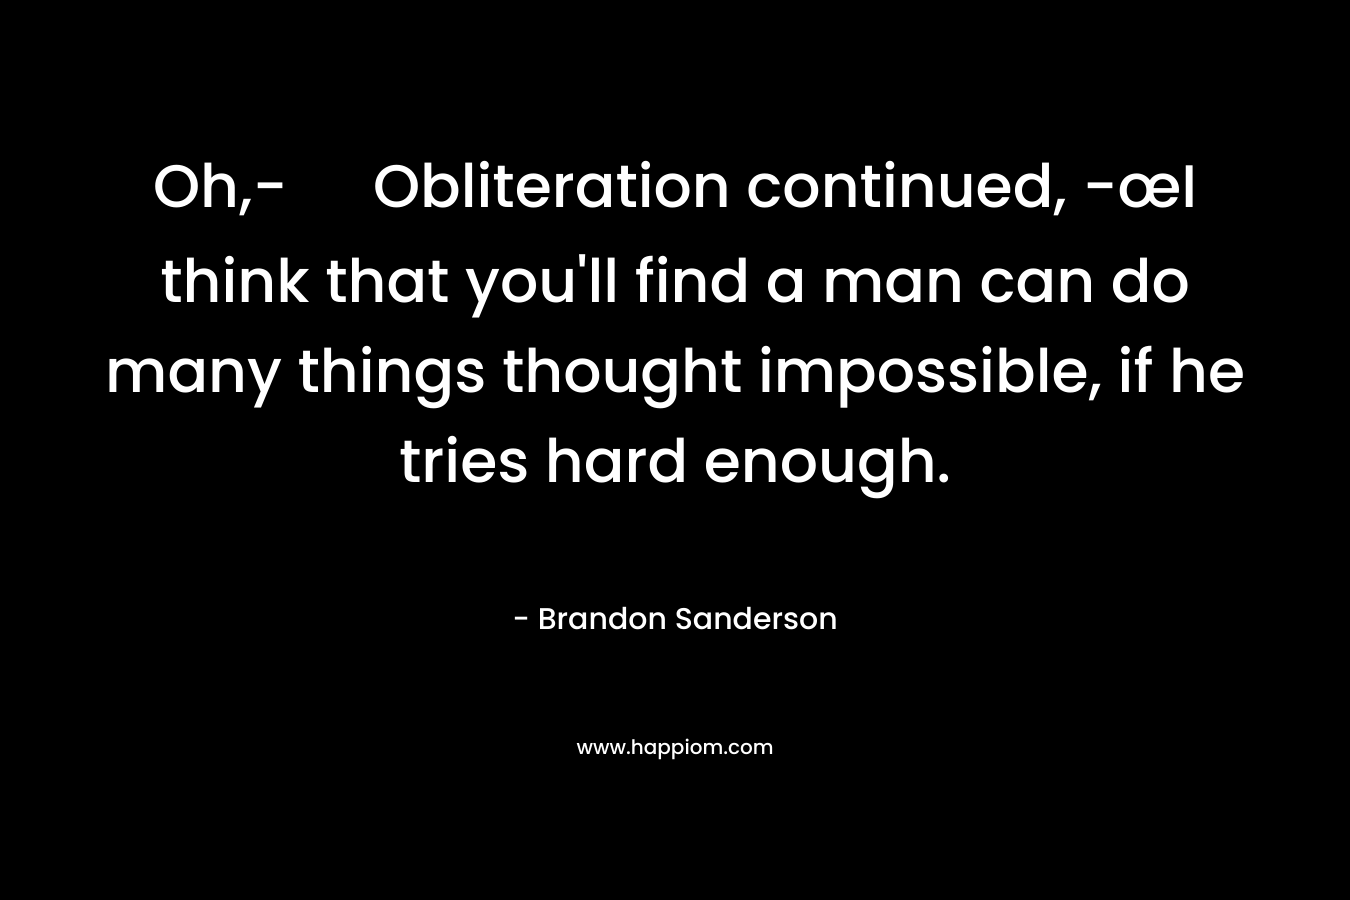 Oh,- Obliteration continued, -œI think that you’ll find a man can do many things thought impossible, if he tries hard enough. – Brandon Sanderson